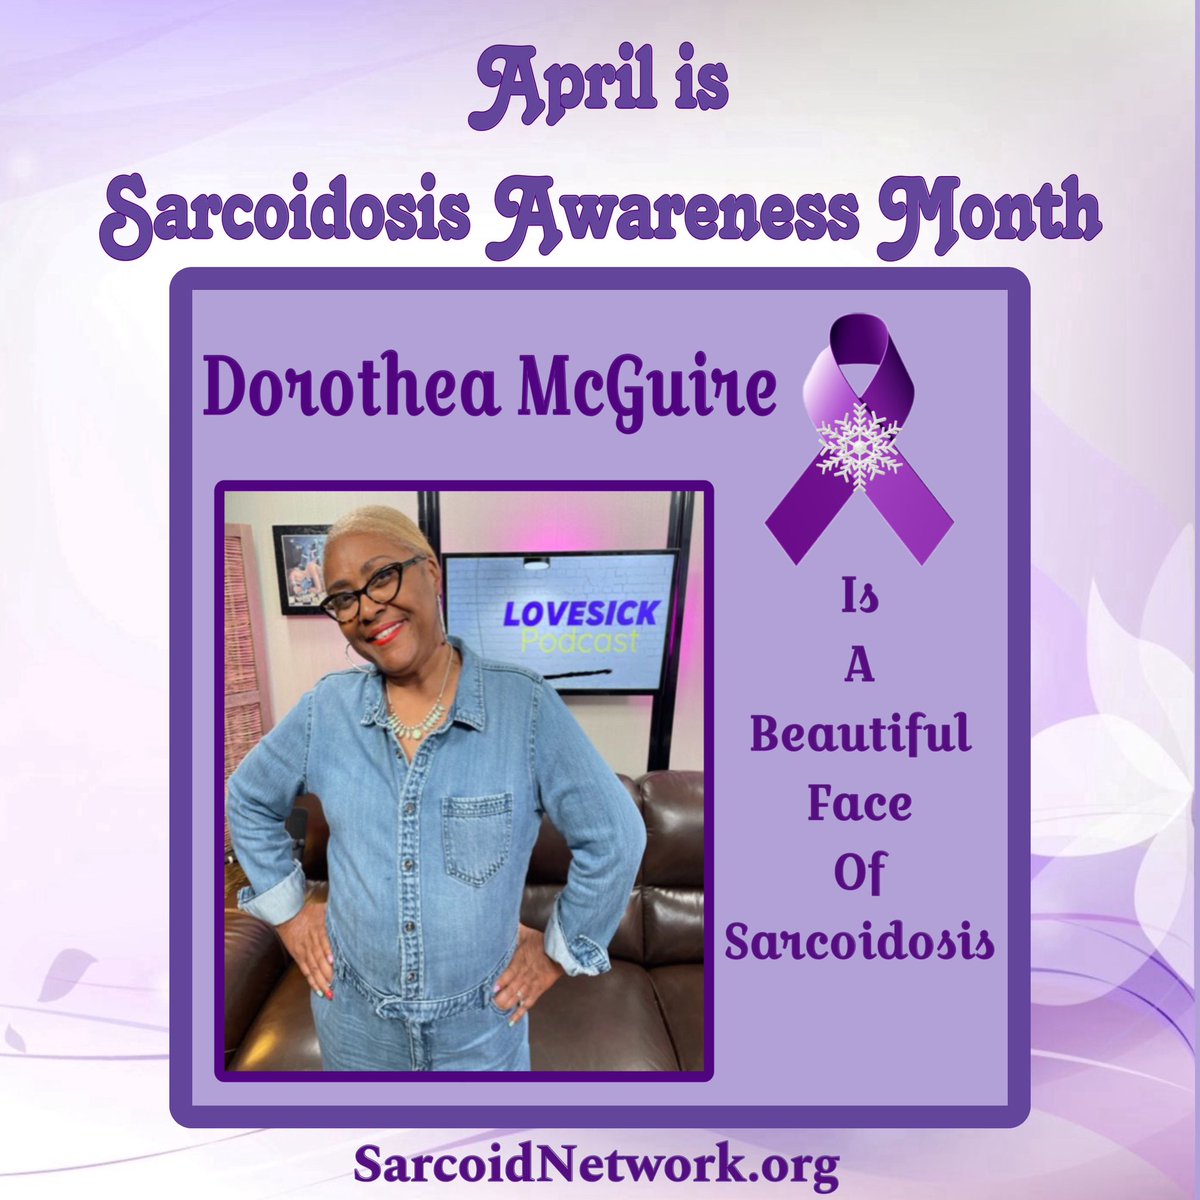 This is our Sarcoidosis Sister Dorothea McGuire and she is a Beautiful Face of Sarcoidosis!💜

#Sarcoidosis #raredisease #patientadvocate #sarcoidosisadvocate #beautifulfacesofsarcoidosis #sarcoidosisawarenessmonth